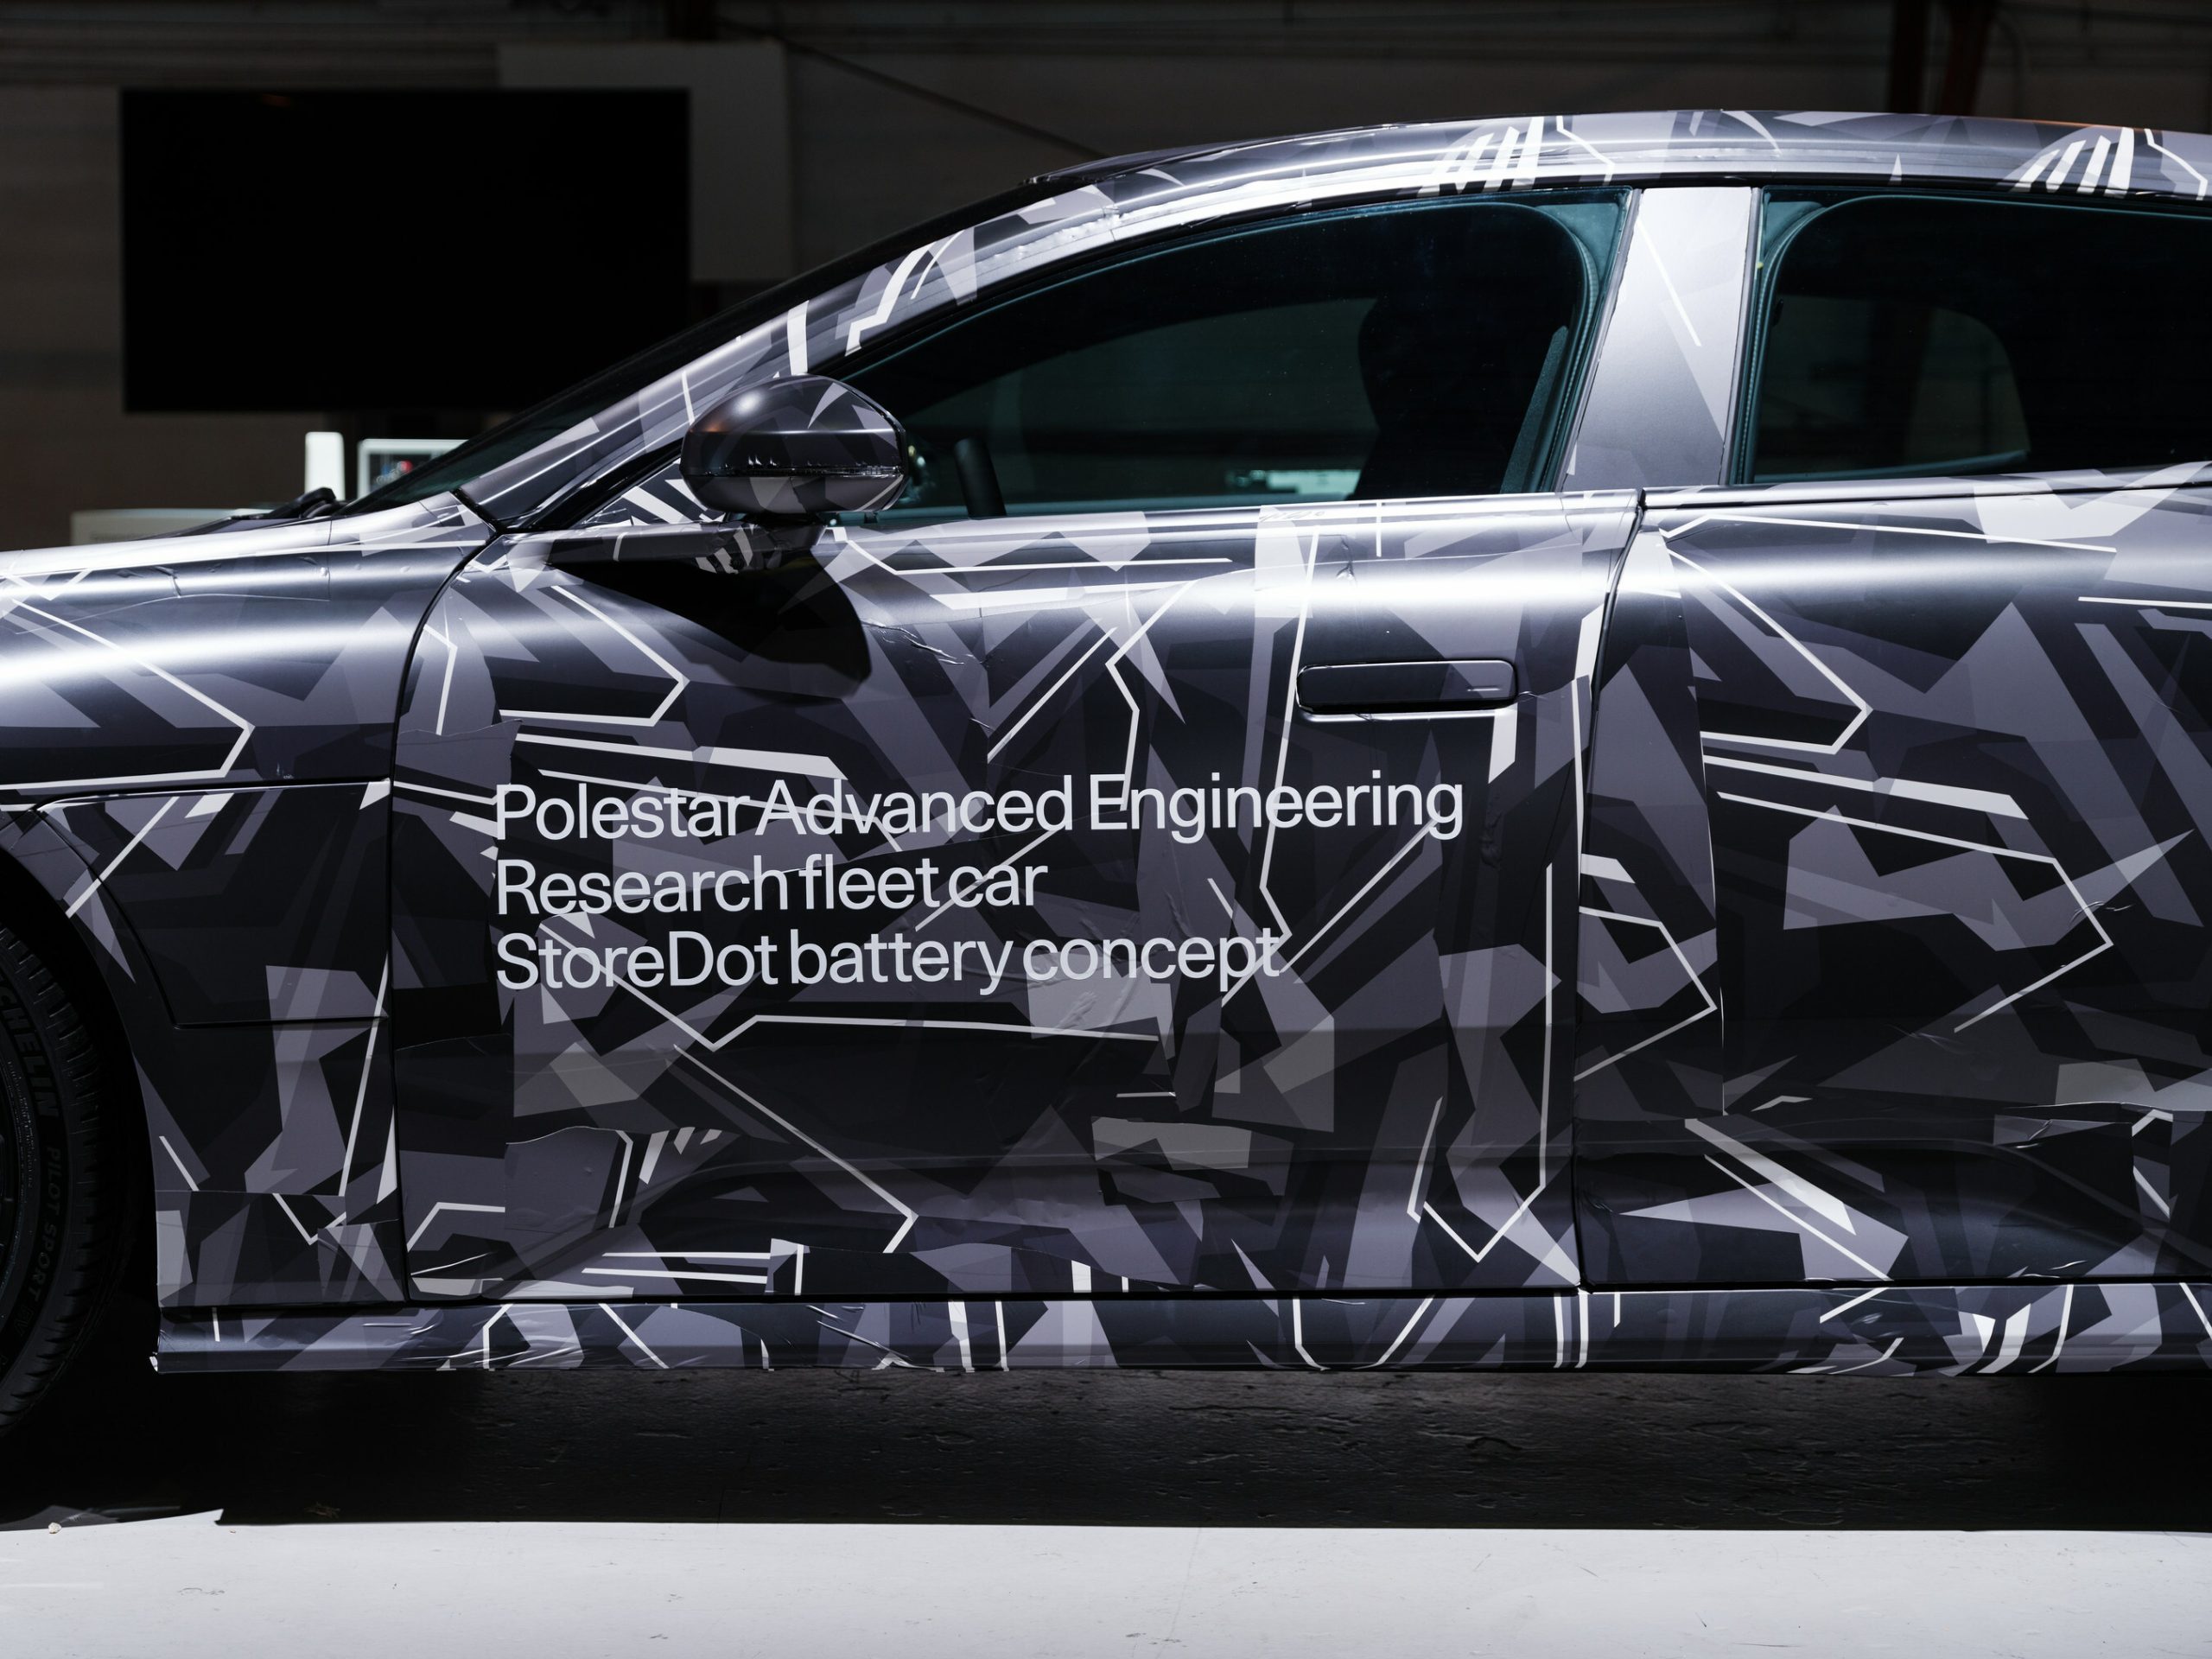 Polestar and StoreDot are partnering to demonstrate fastest-charging EV battery